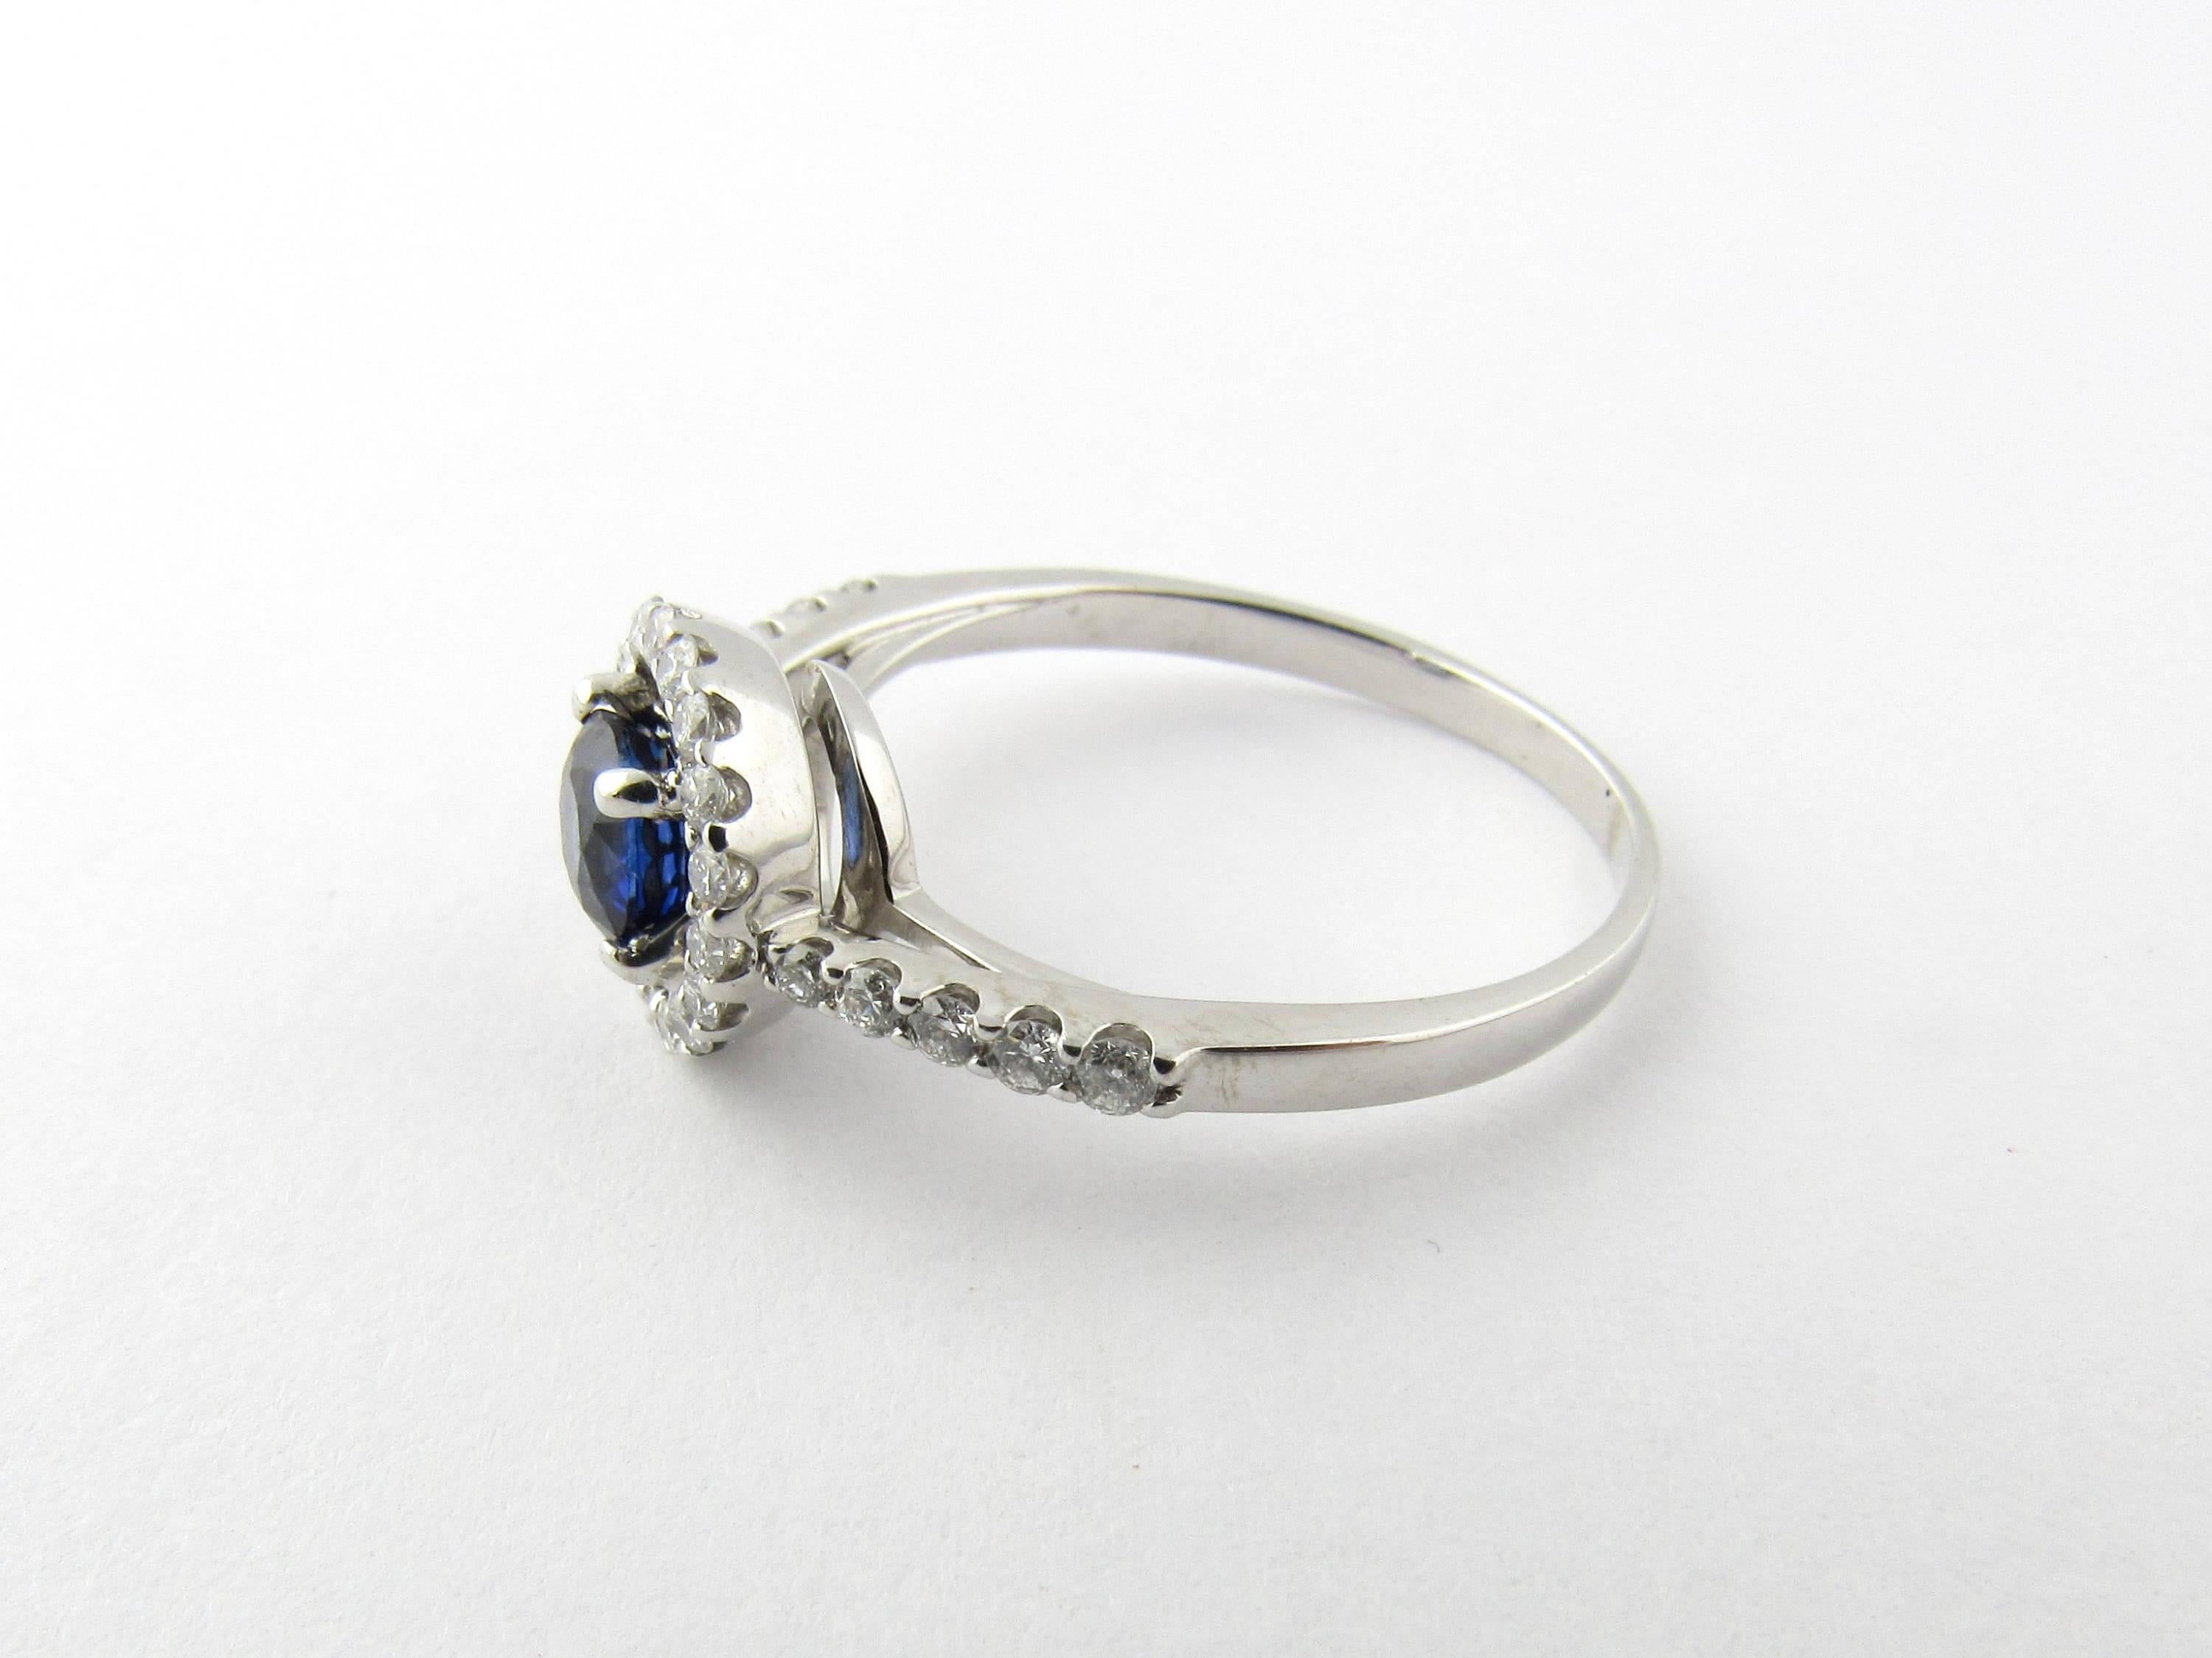 Vintage 14 Karat White Gold Natural Sapphire and Diamond Ring Size 8.5-

This lovely ring features one genuine blue sapphire (.71 ct.) accented with 28 round brilliant cut diamonds set in beautifully detailed white gold.

Approximate total diamond